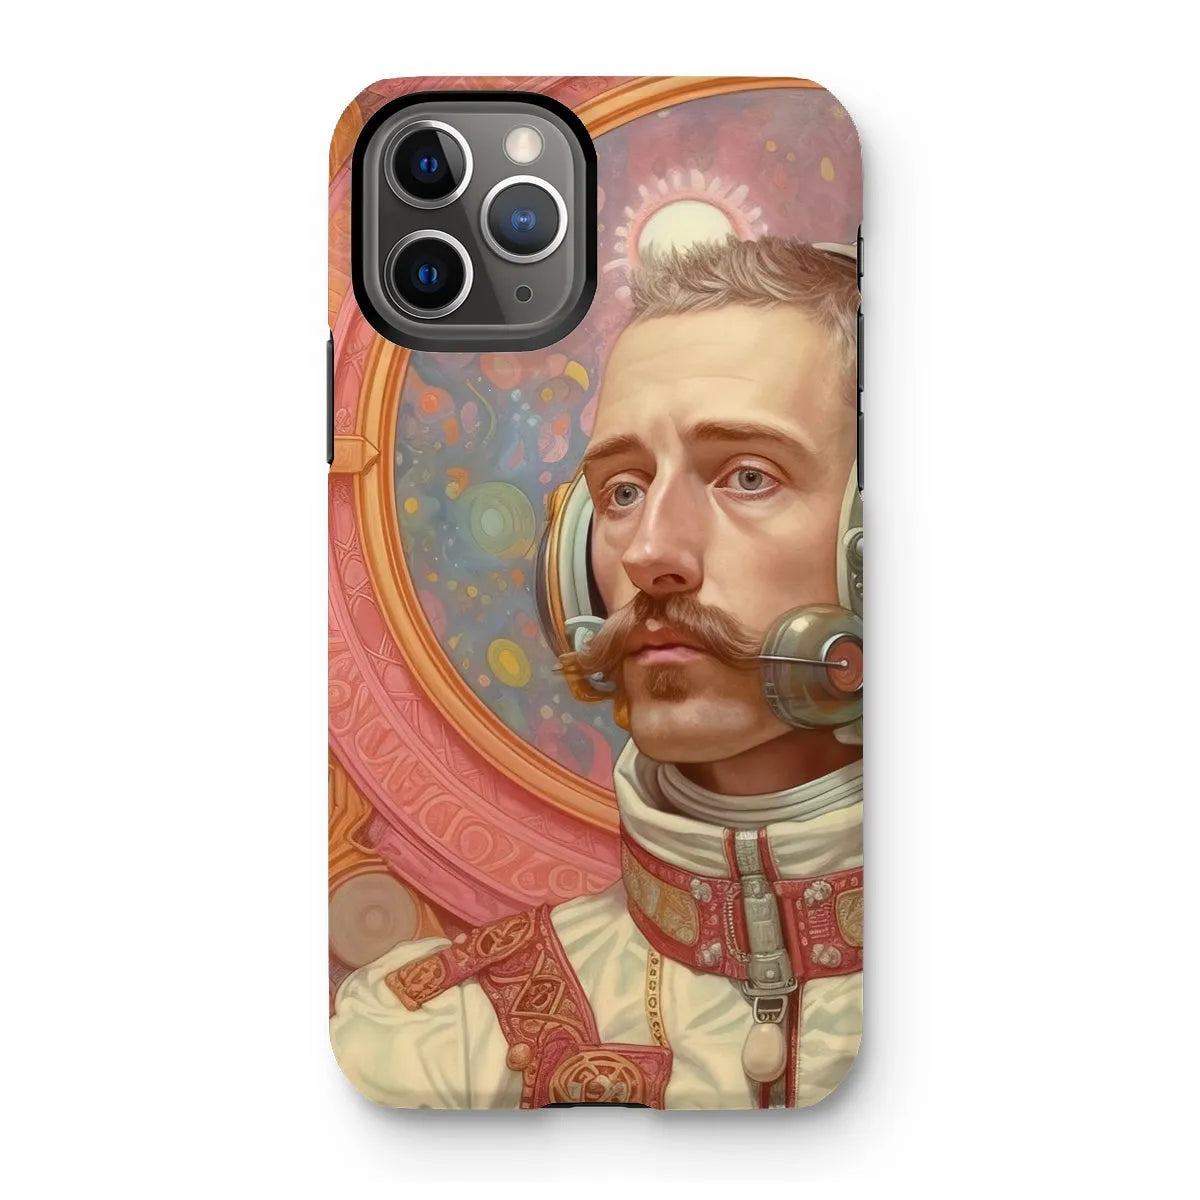 Axel The Gay Astronaut - Gay Aesthetic Art Phone Case - Iphone 11 Pro / Matte - Mobile Phone Cases - Aesthetic Art